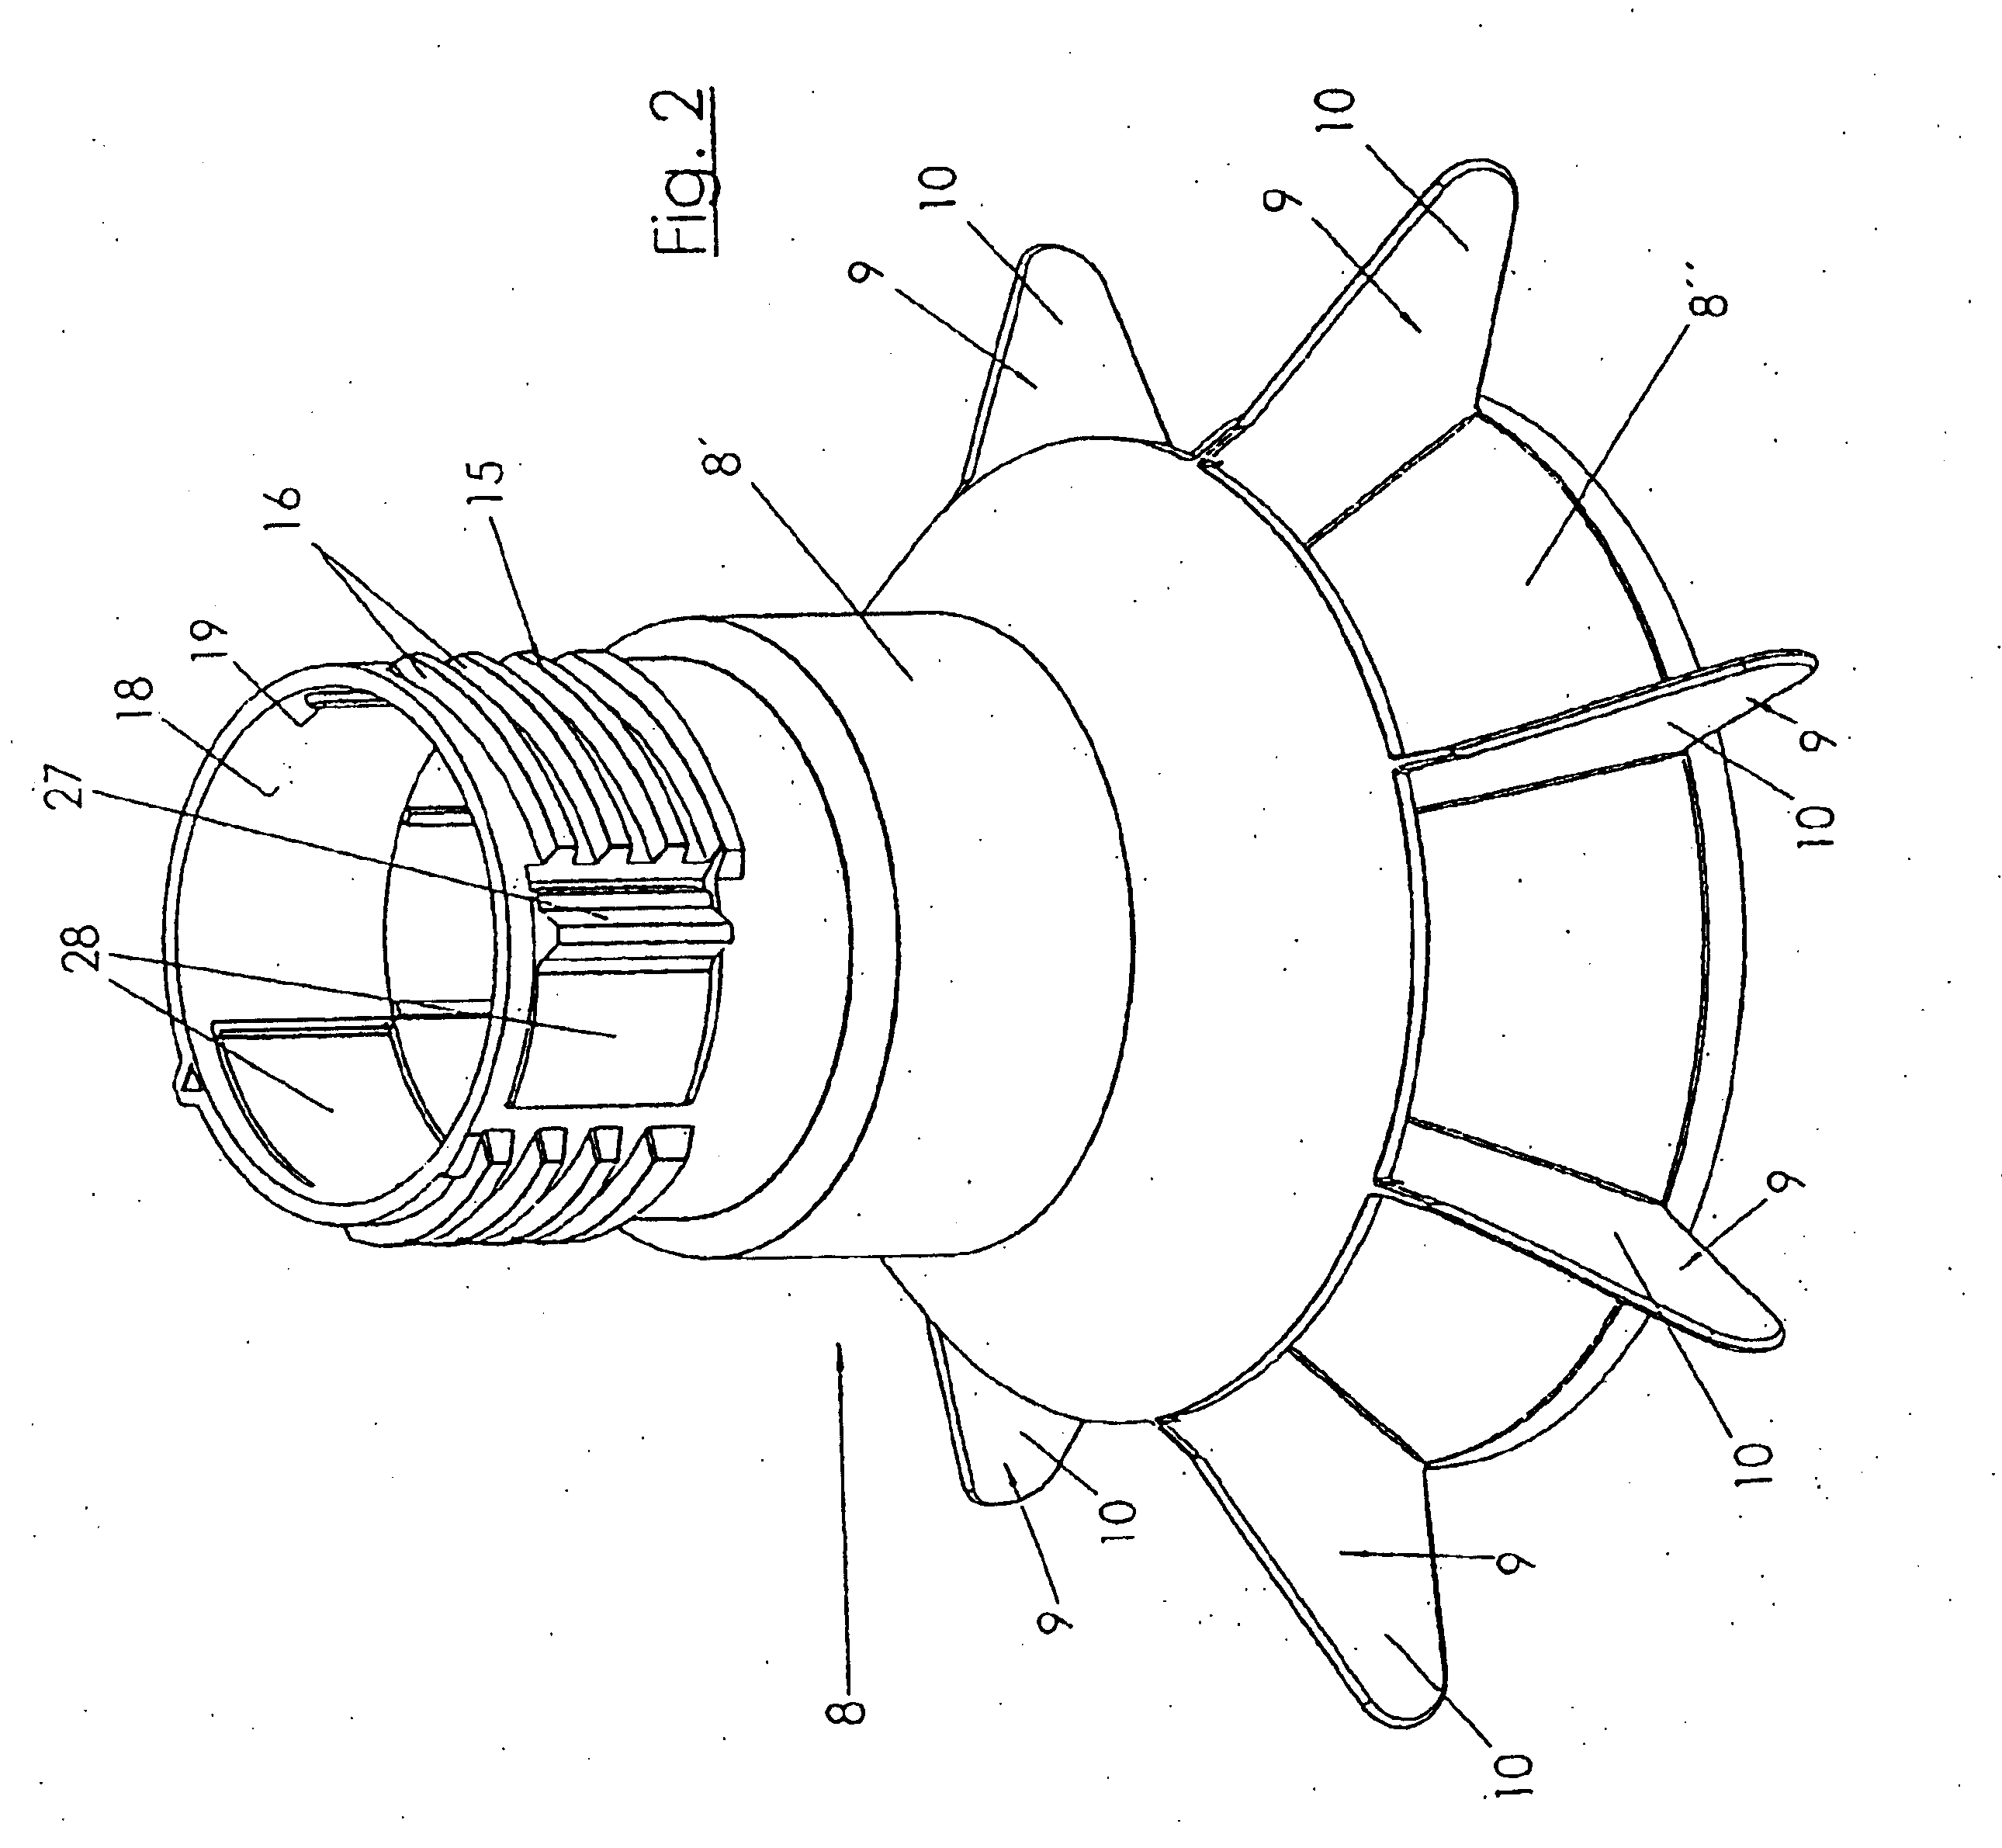 Device for feeding poultry in particular fattening poultry, preferably boilers